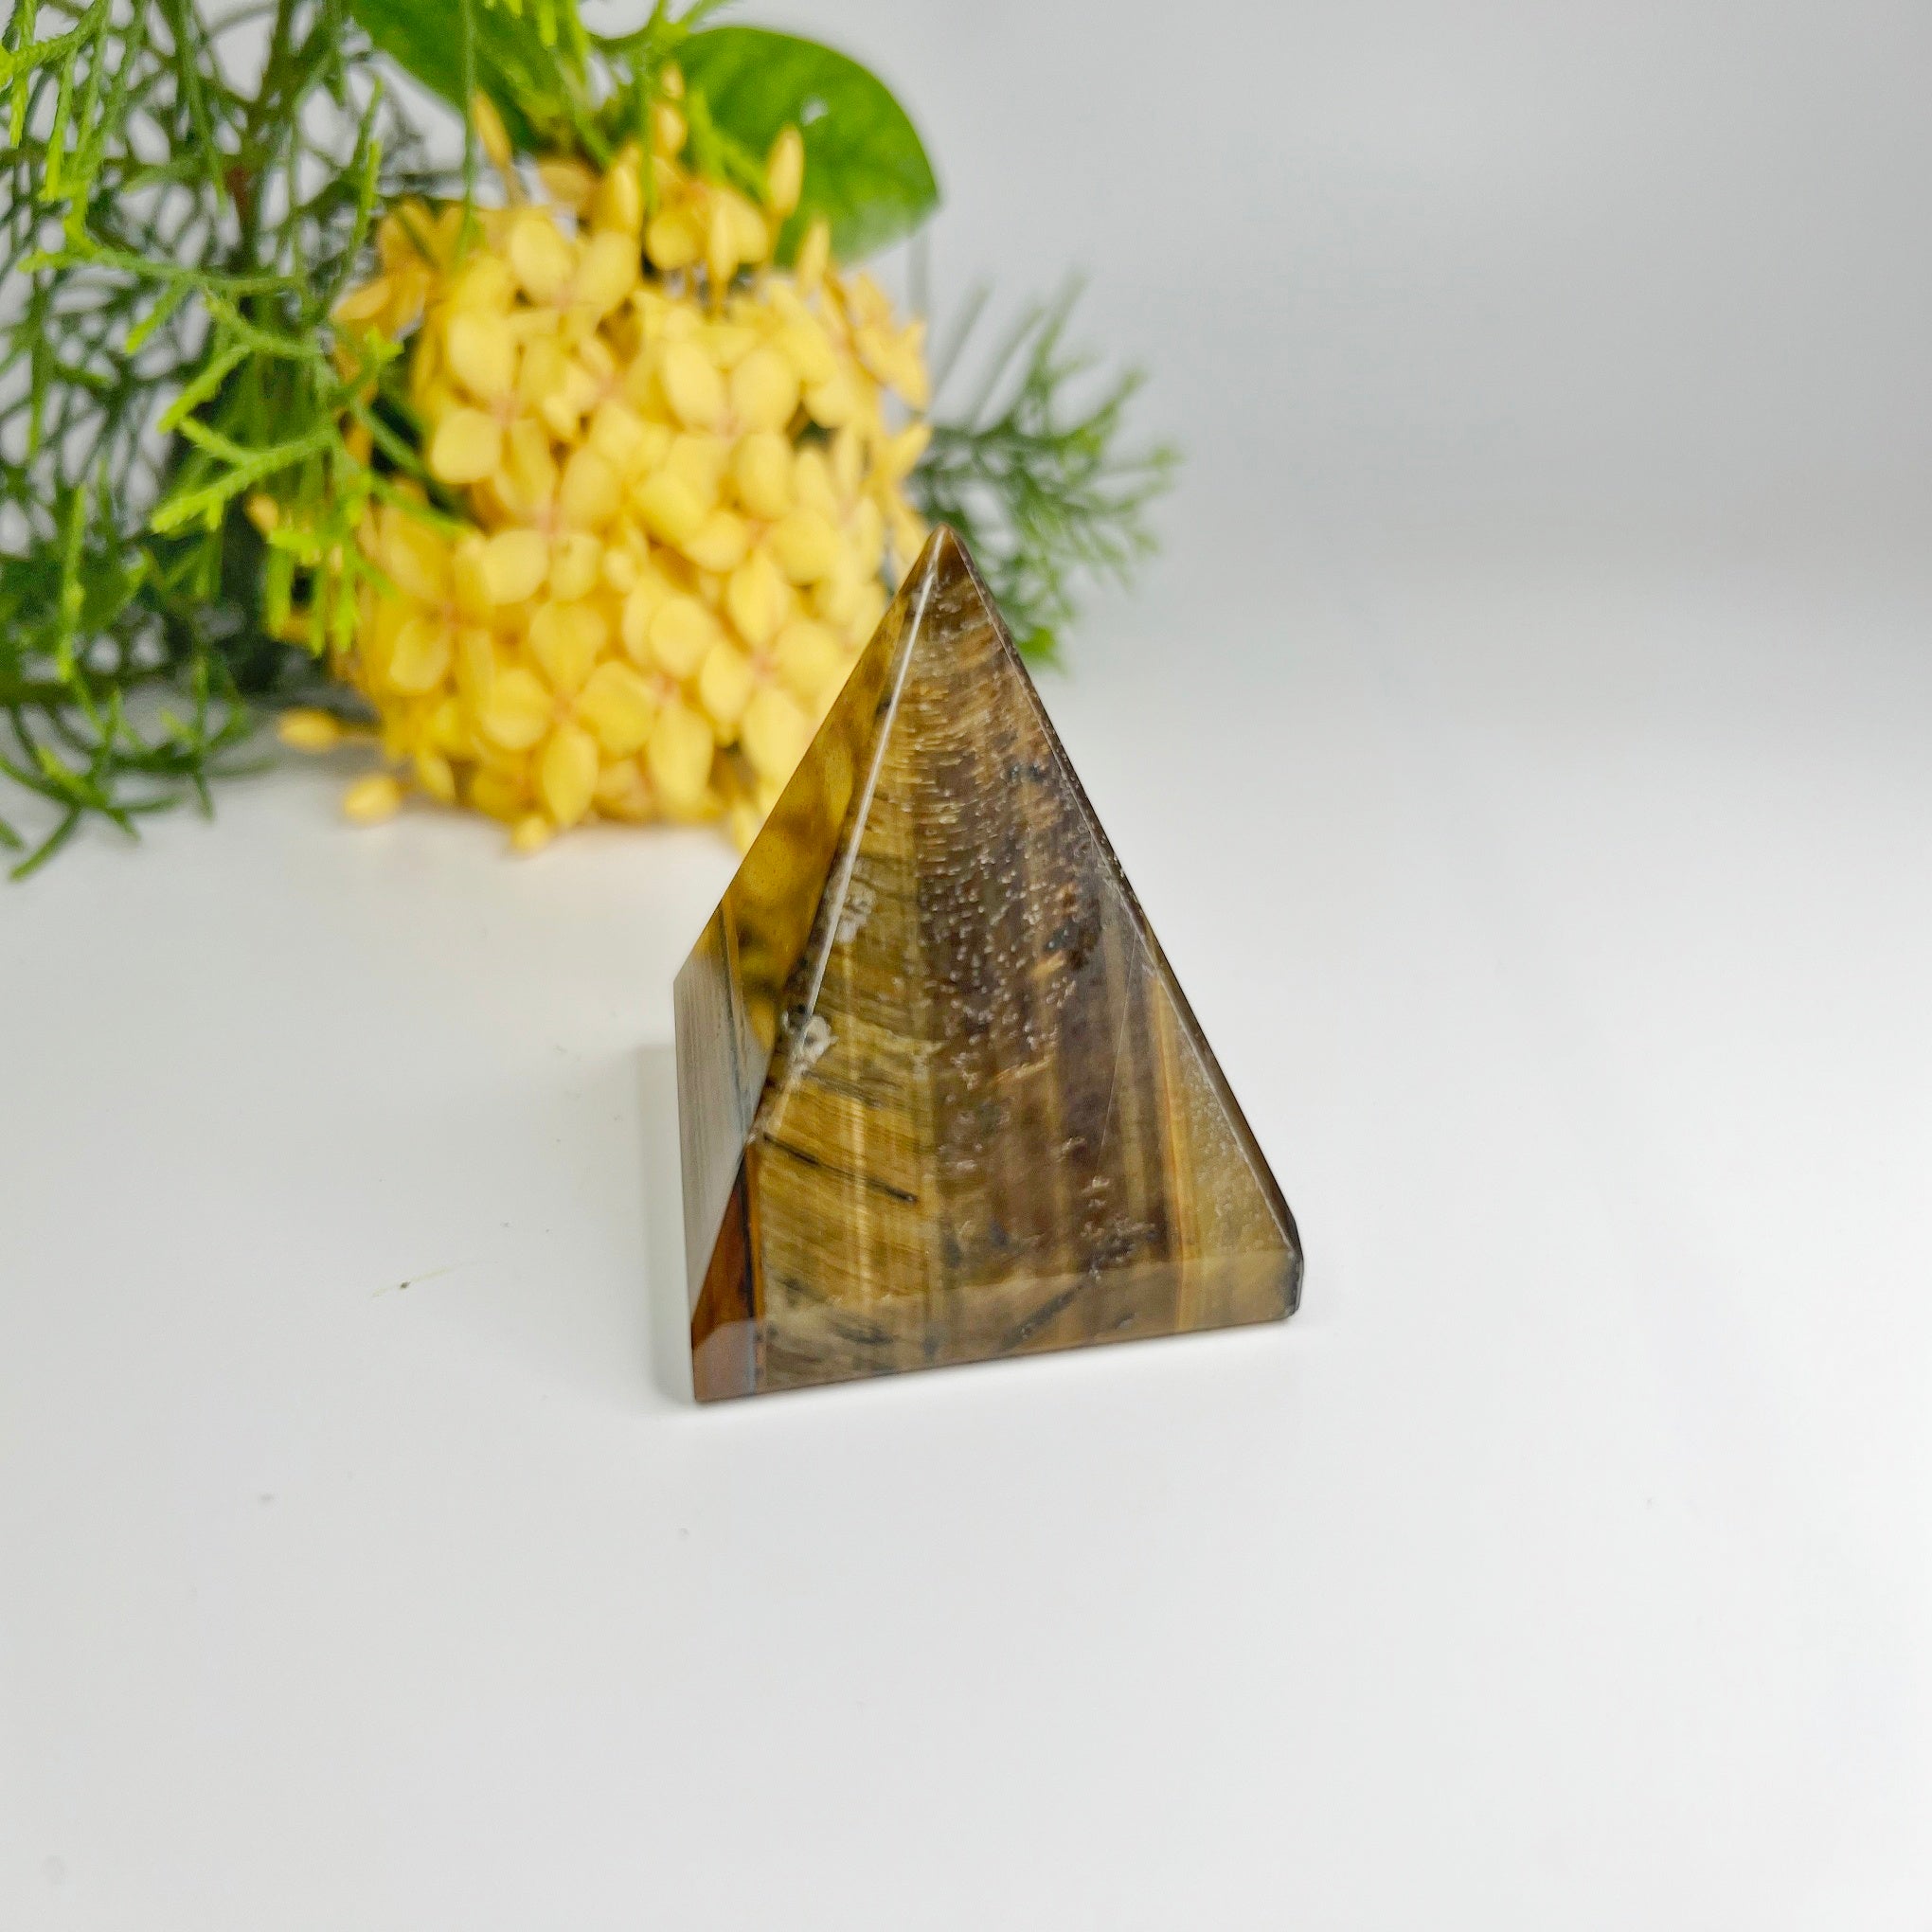 CERTIFIED TIGER EYE PYRAMID CRYSTAL DARK BROWN BLACK COLOUR MEDITATION HEALING ACCESSORY  HOME OFFICE GIFT